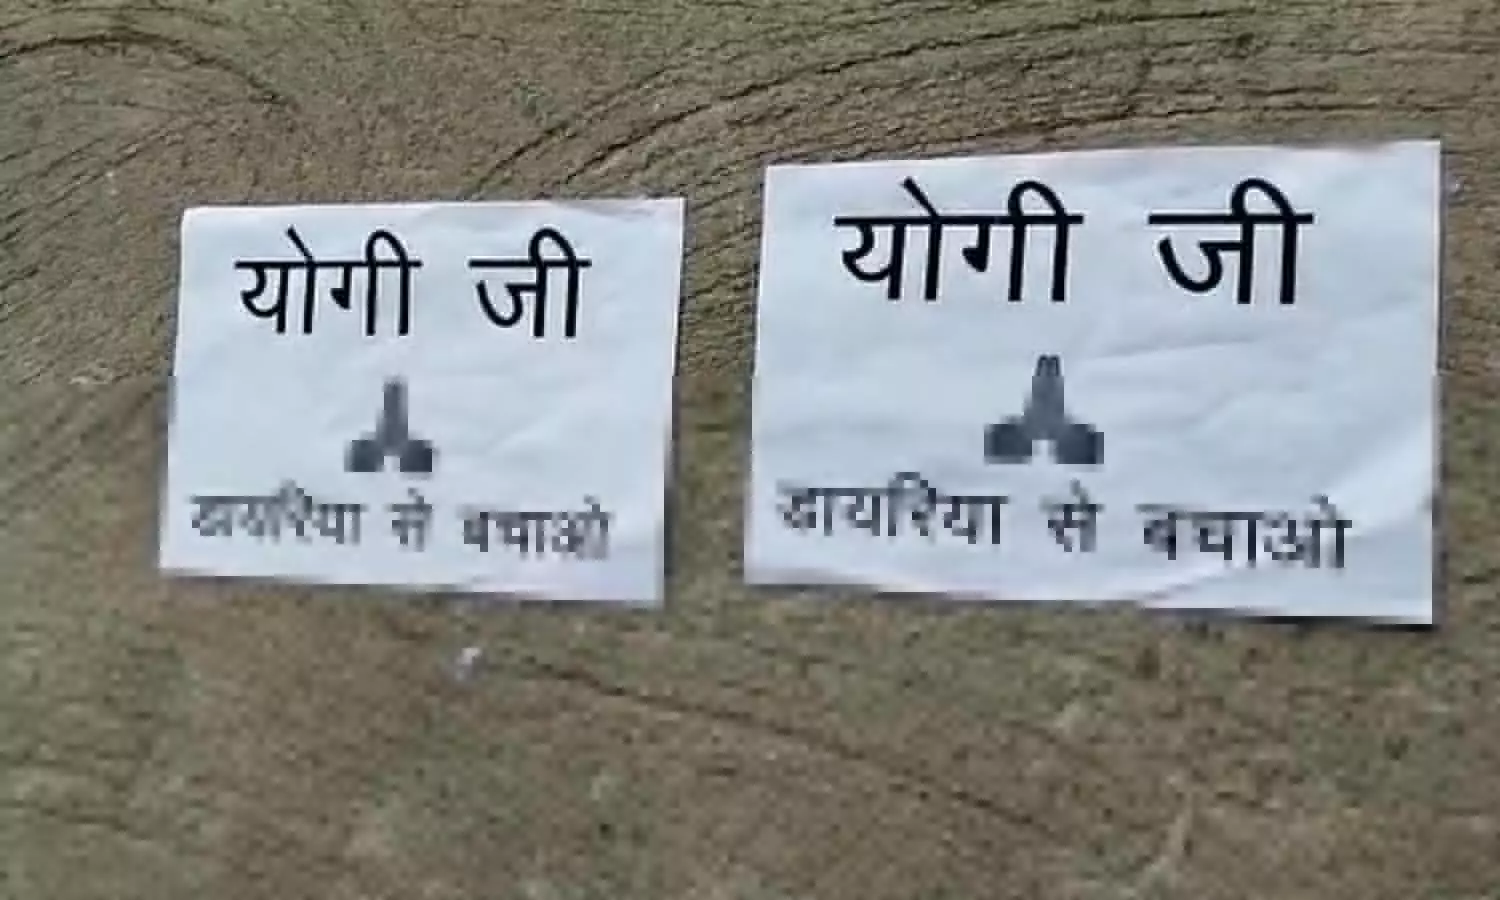 Outbreak of diarrhea spread in Kanpur, pleaded by pasting poster, said Yogi ji save from diarrhea